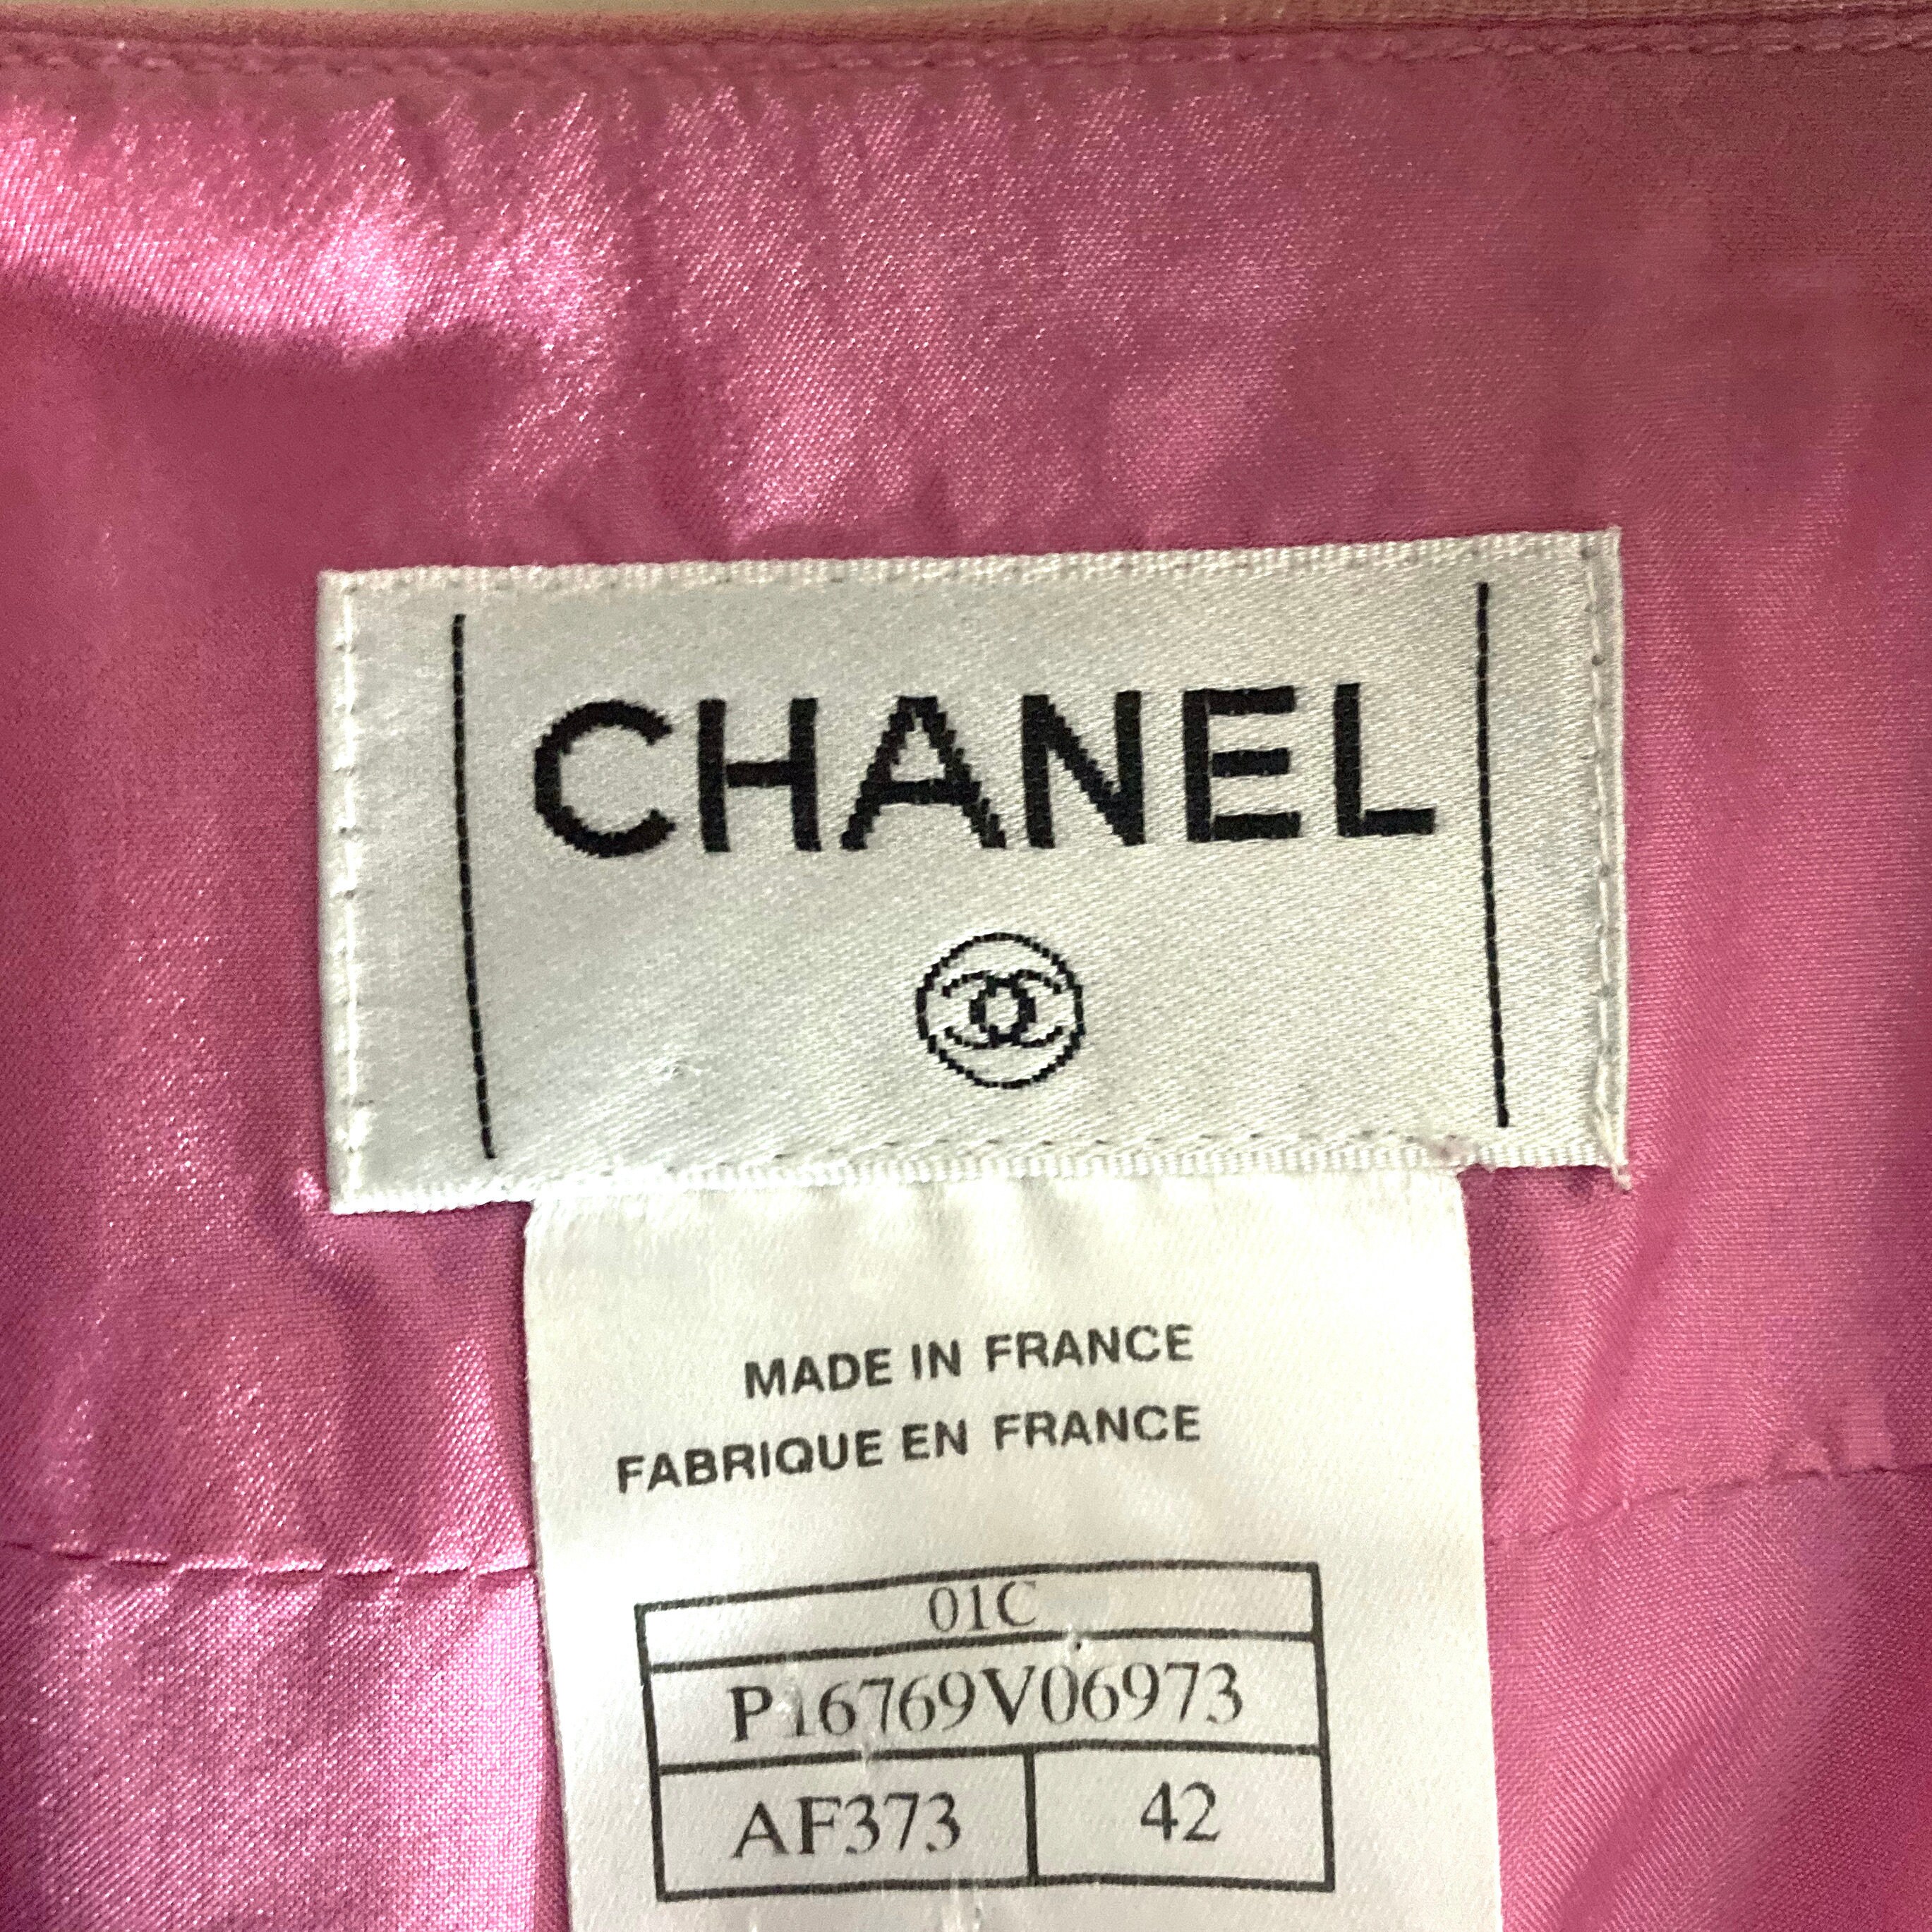 Authentic Chanel Clothing Tag  lupongovph